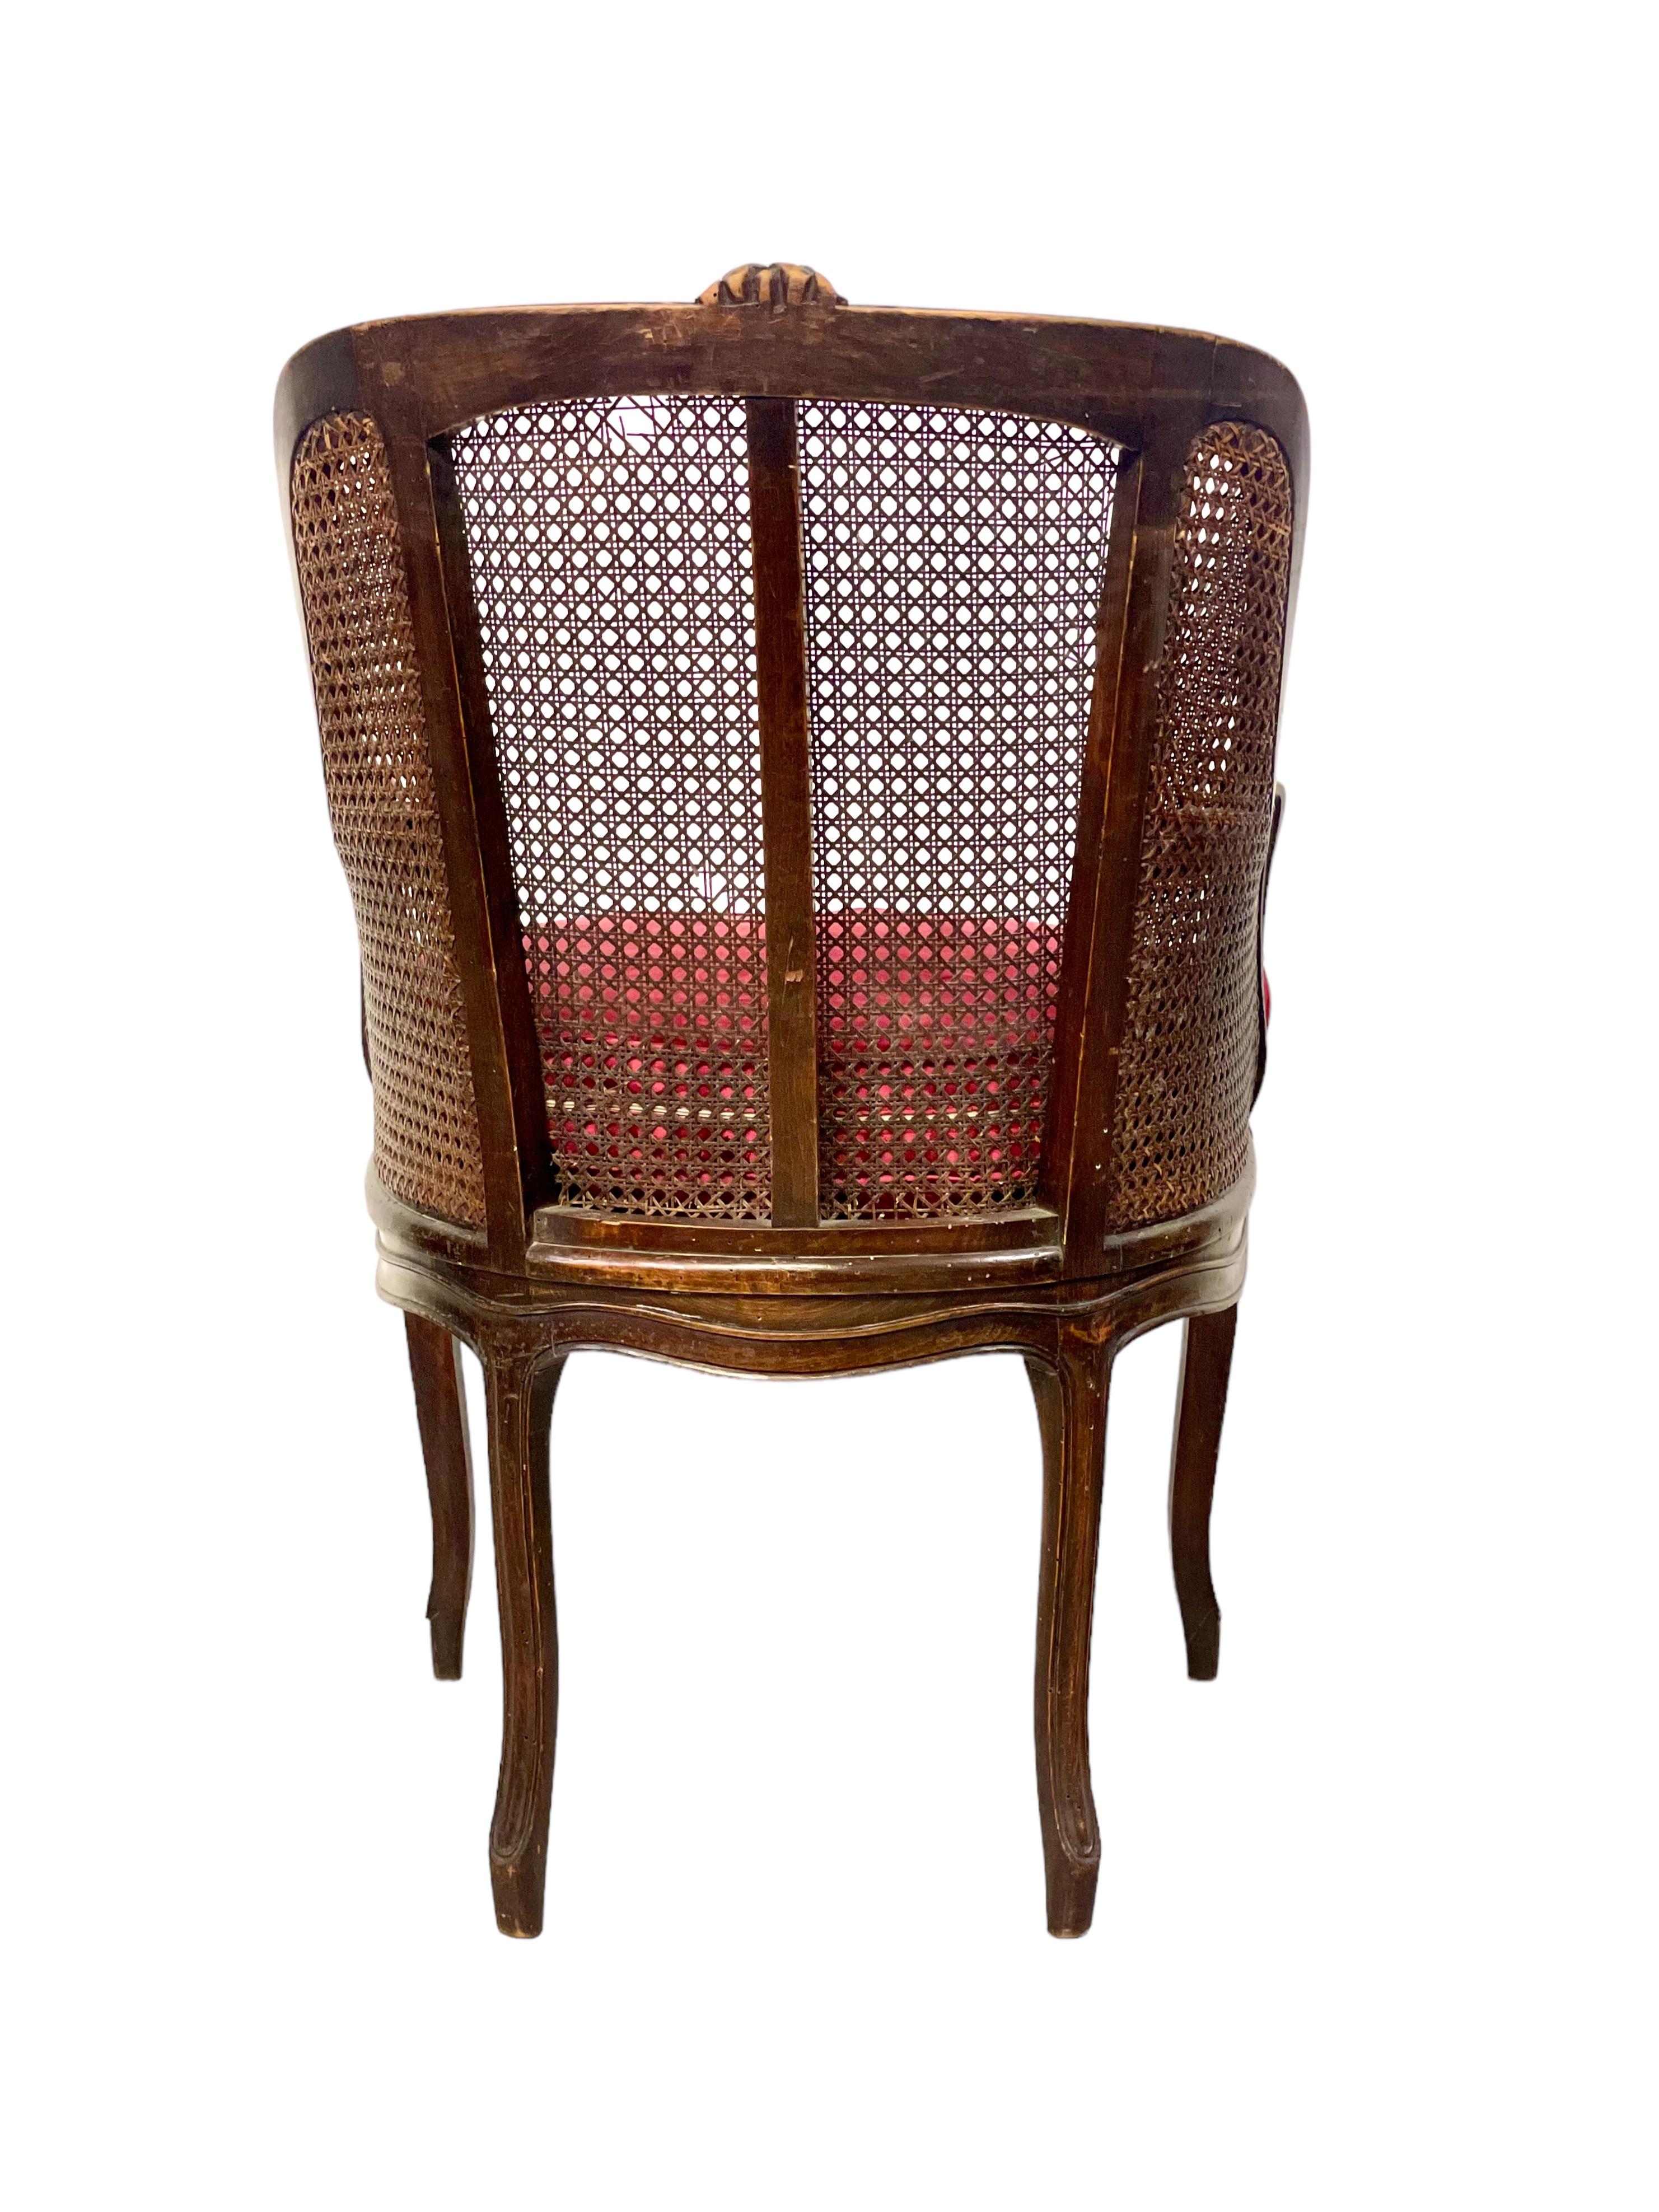 19th Century Louis XV Style Caned Bergère Chair For Sale 7